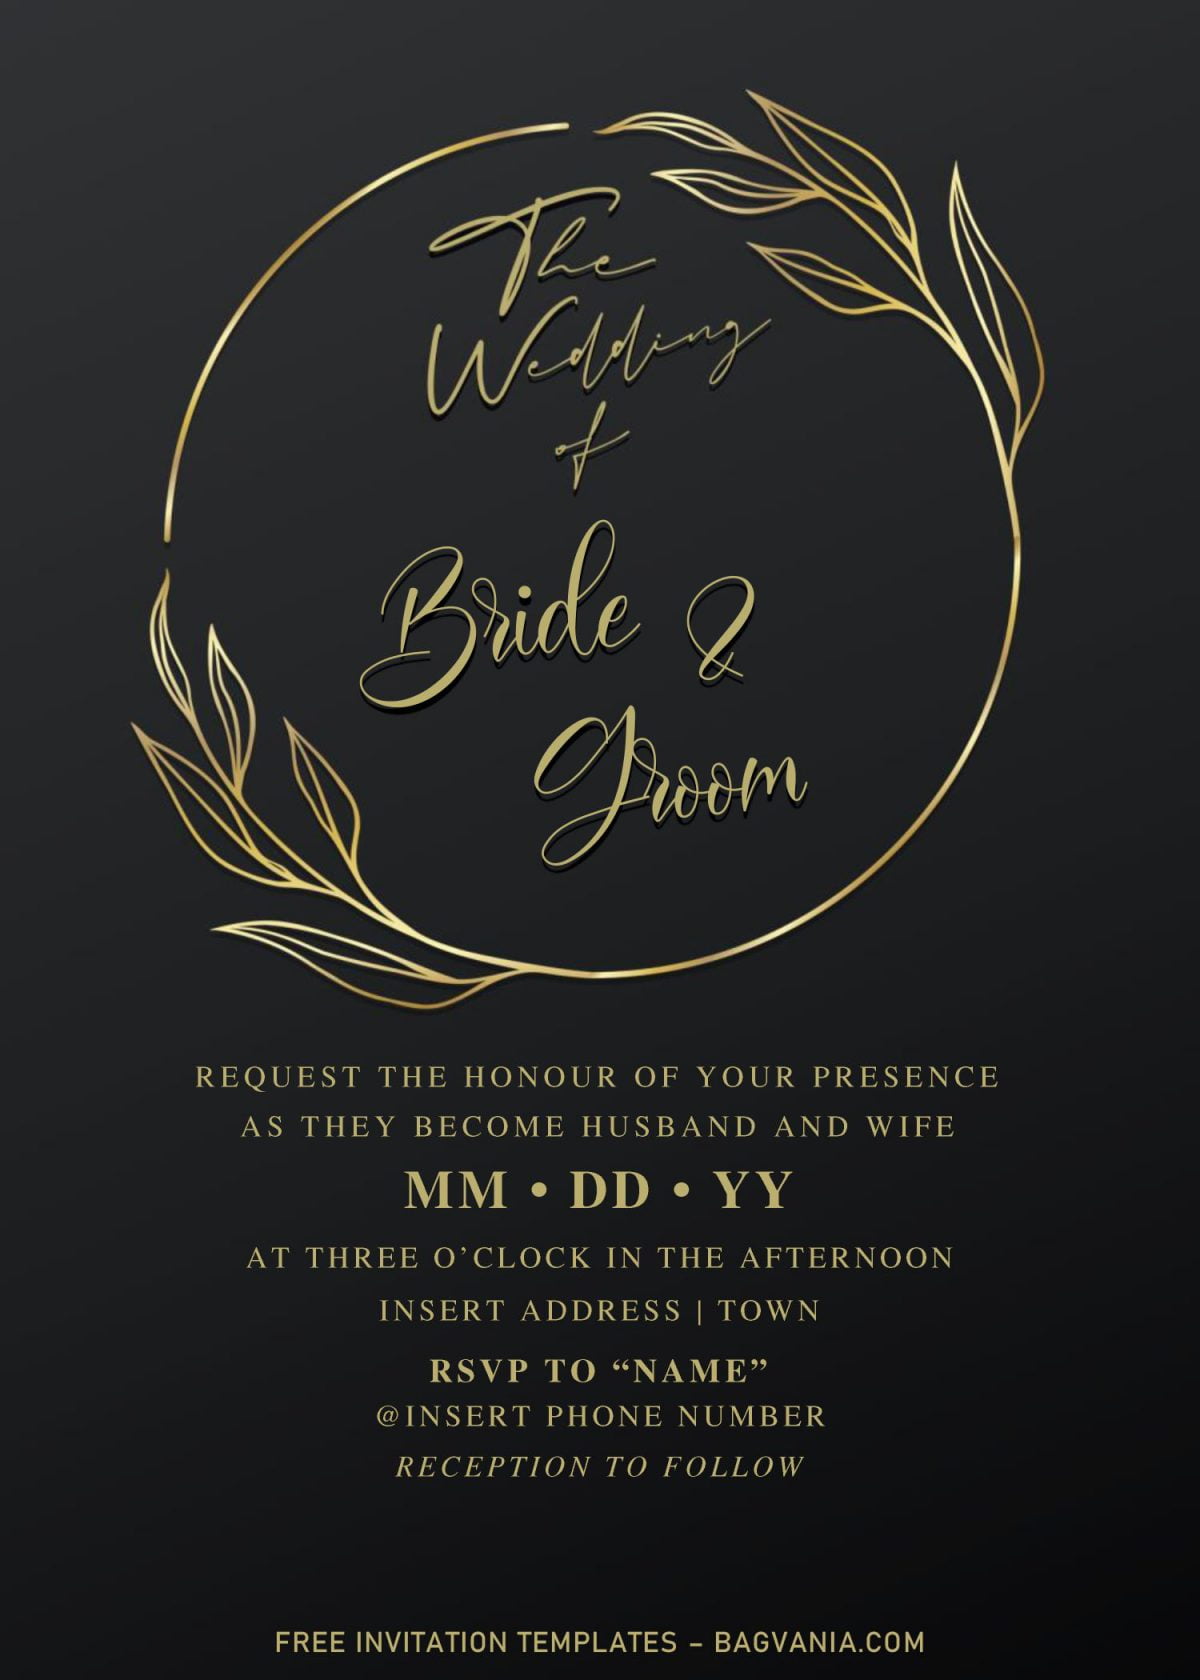 Free Elegant Black And Gold Wedding Invitation Templates For Word and has elegant fonts and texts